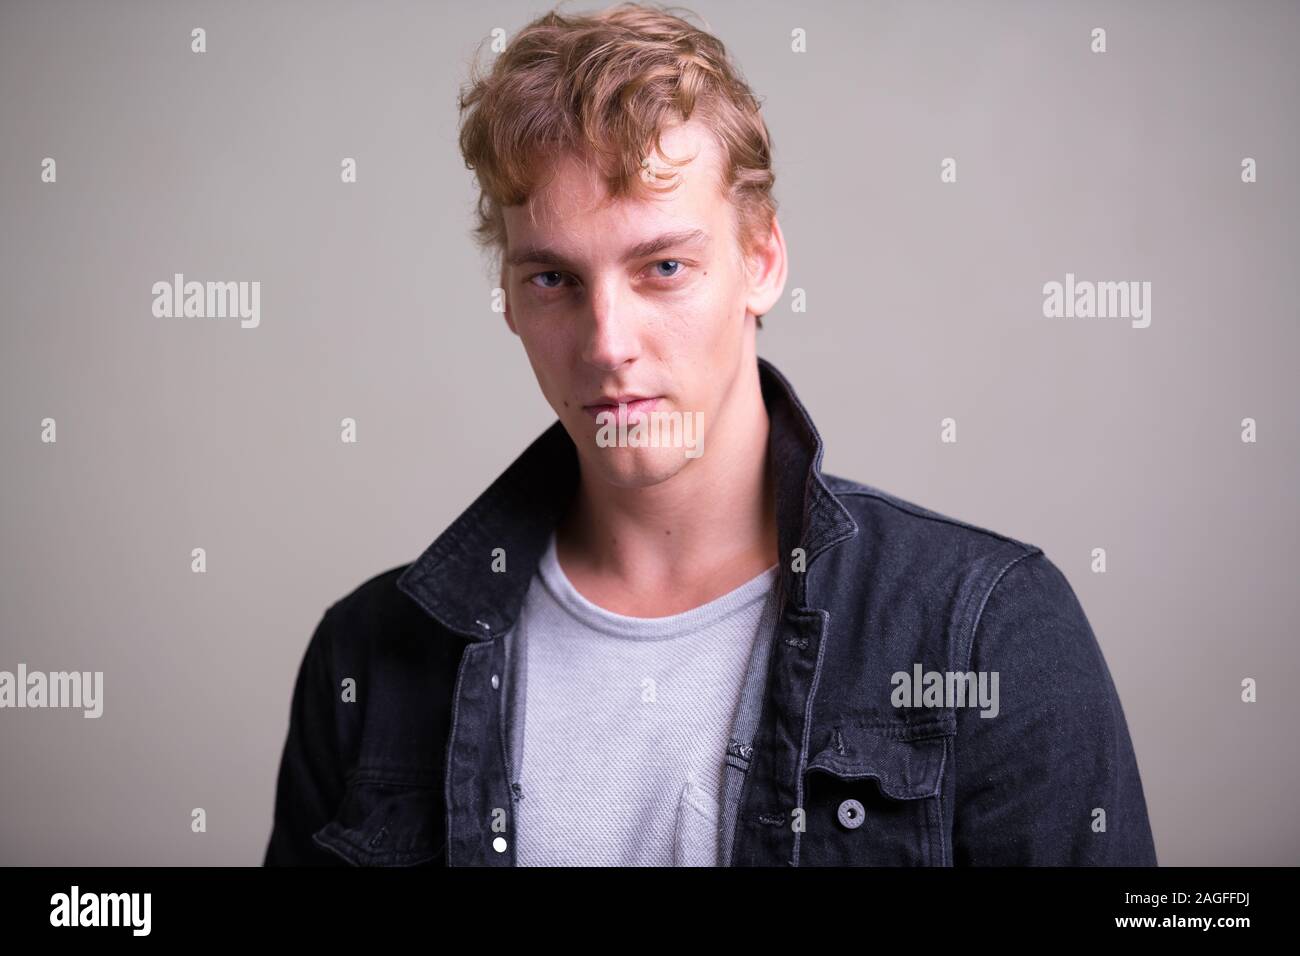 Face of young handsome man with curly hair Stock Photo - Alamy